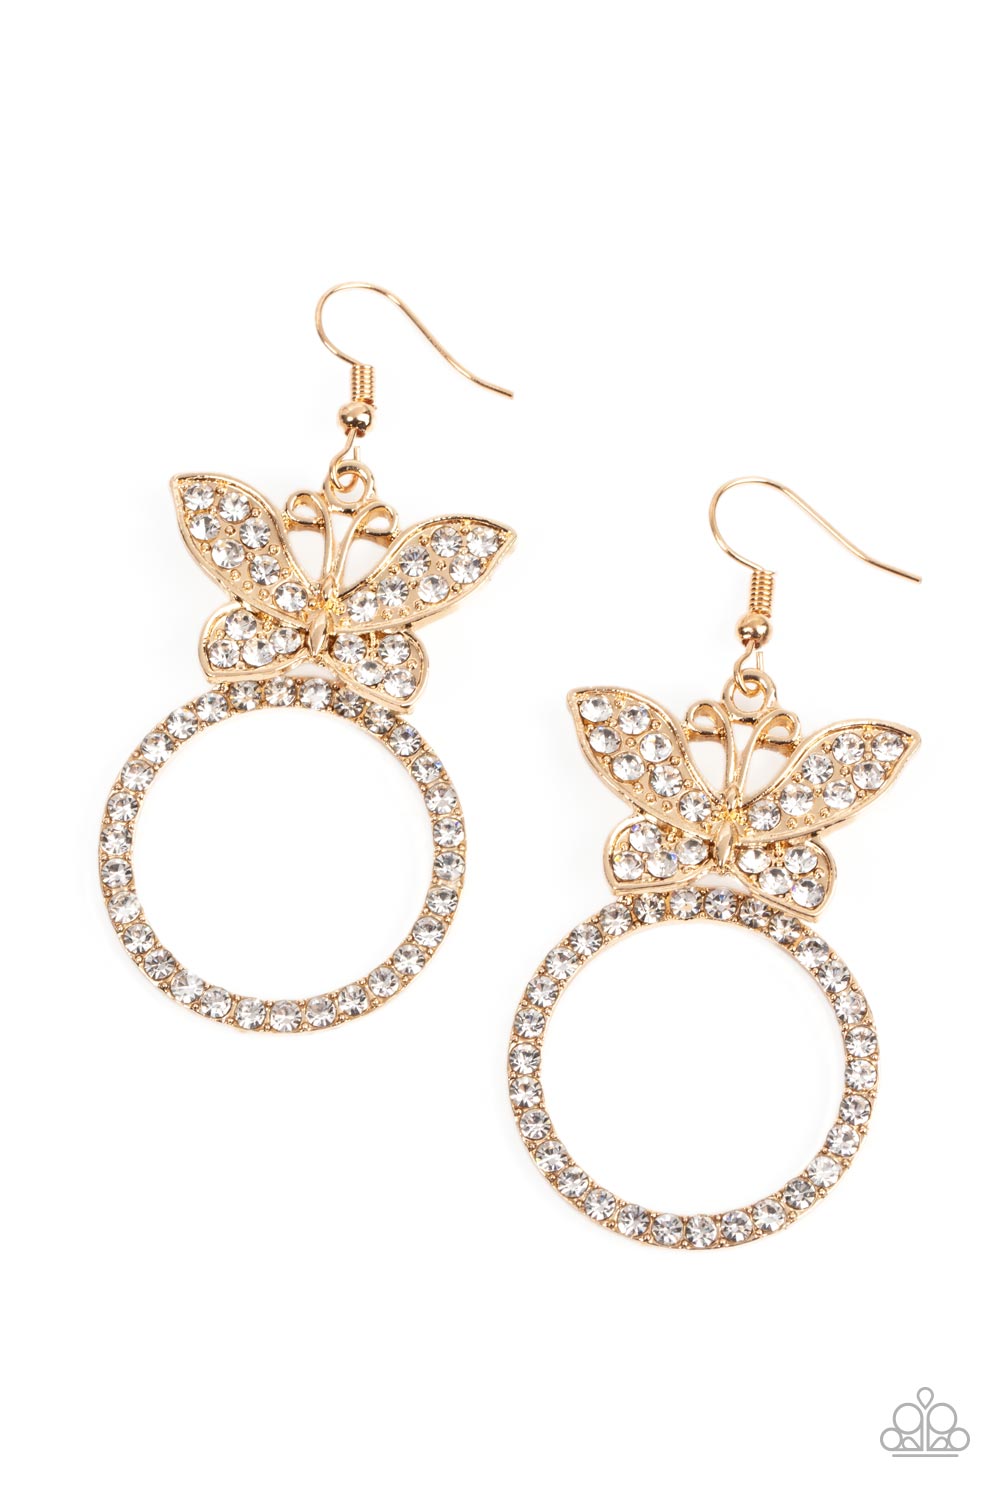 A white rhinestone encrusted gold butterfly flutters atop a gold ring dotted in matching white rhinestones